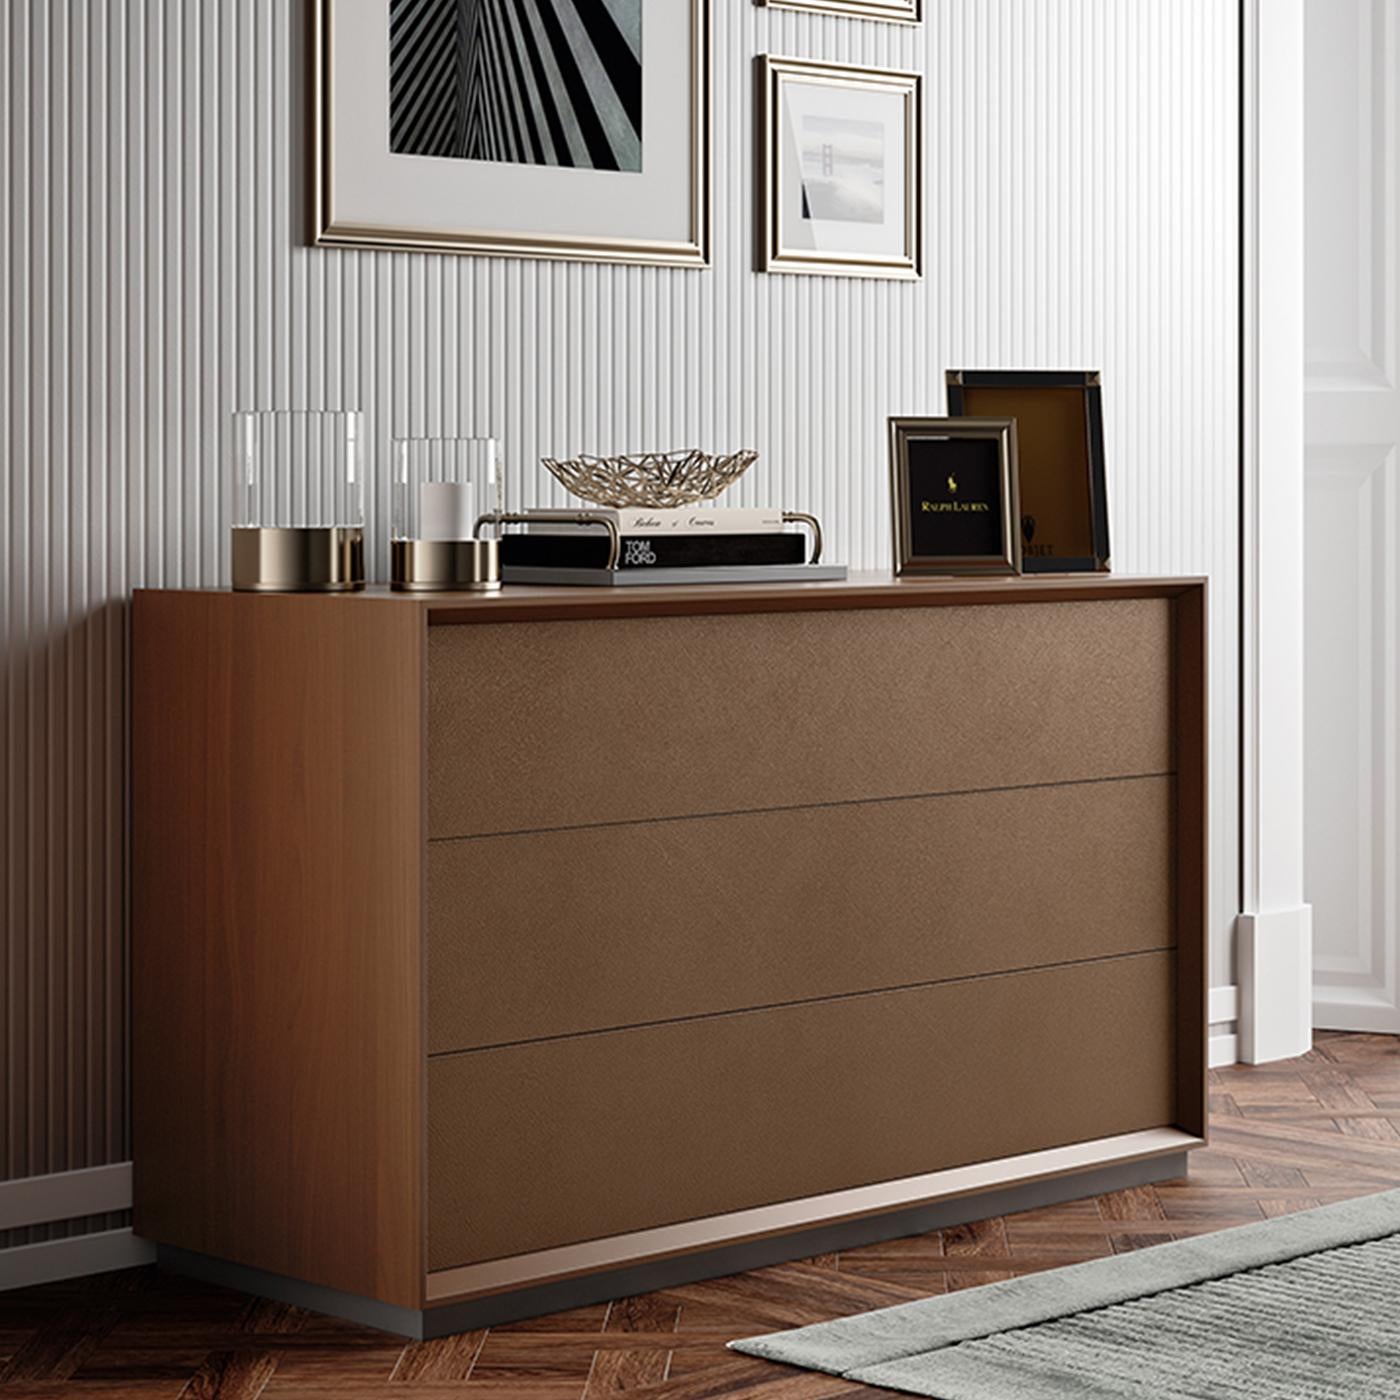 A superb synthesis of modern style elevated by consistent tailored details, this exclusive dresser will complete the look of any bedroom in a neutral color palette. The dark finish of the Canatto walnut-veneered MDF structure is matched by the